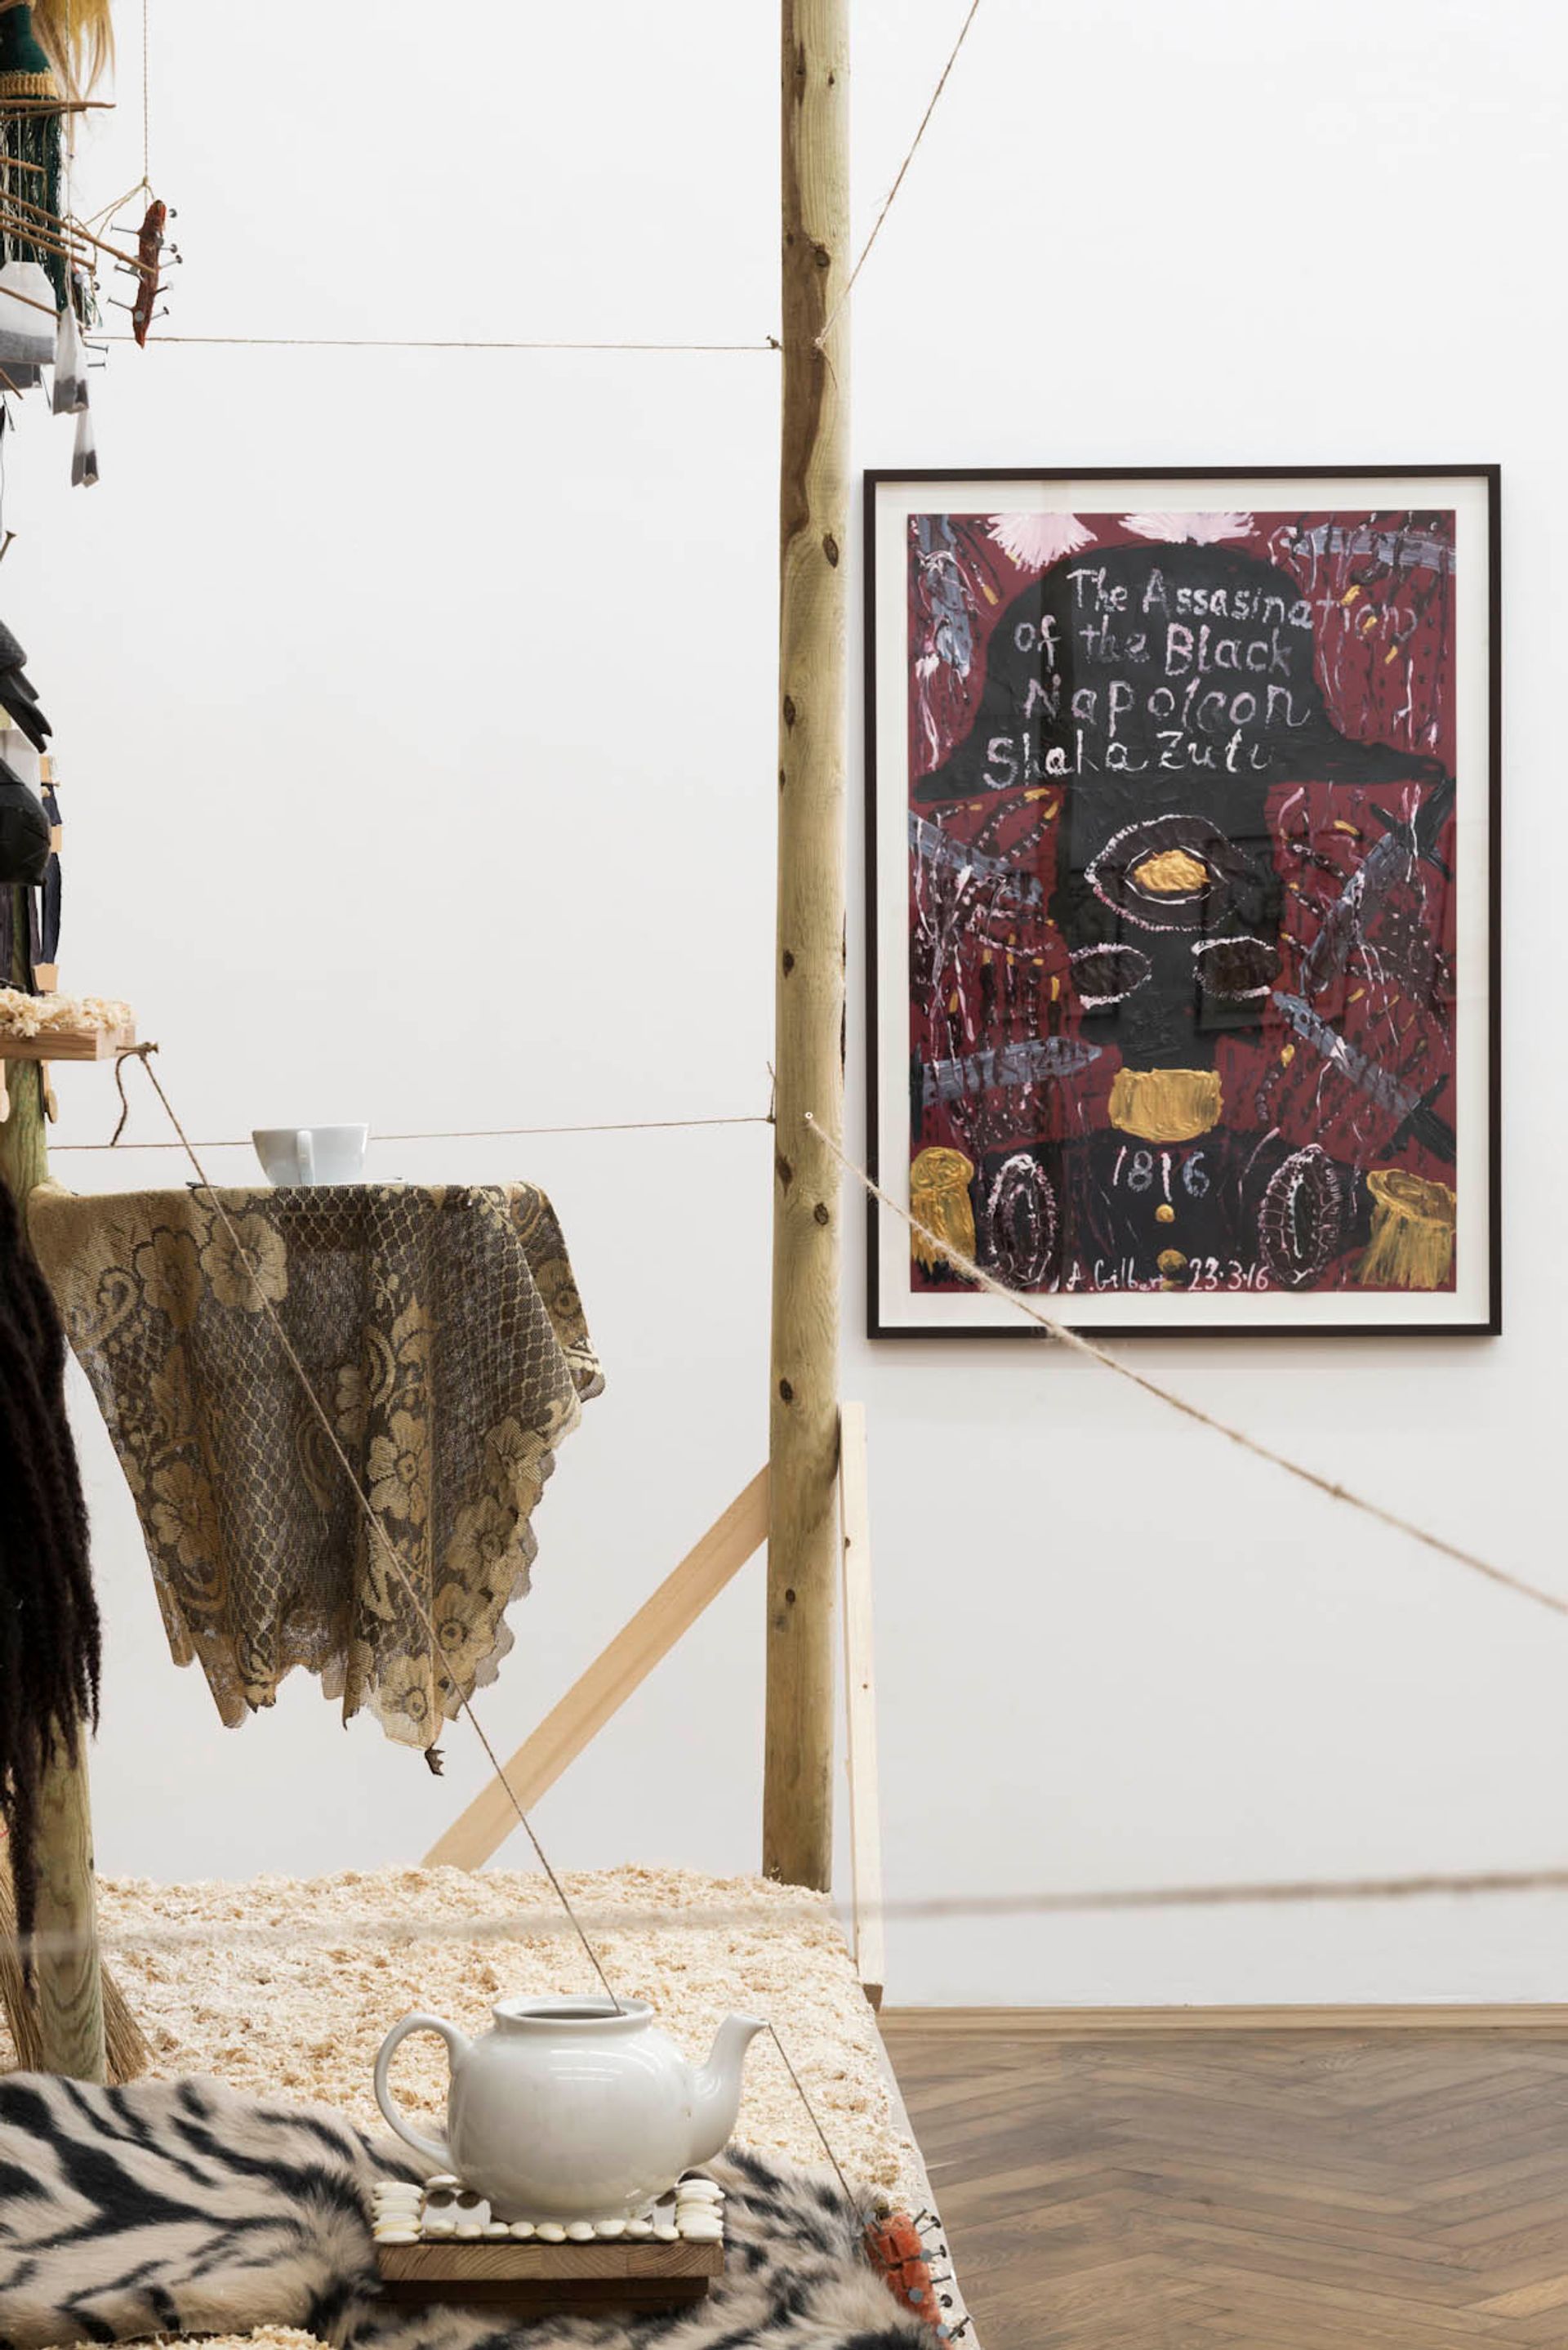 Installation view: Andrew Gilbert, “Shaka Zulu - The Musical - directed by and starring Andrew”, 2016, photo: Leonie Felle